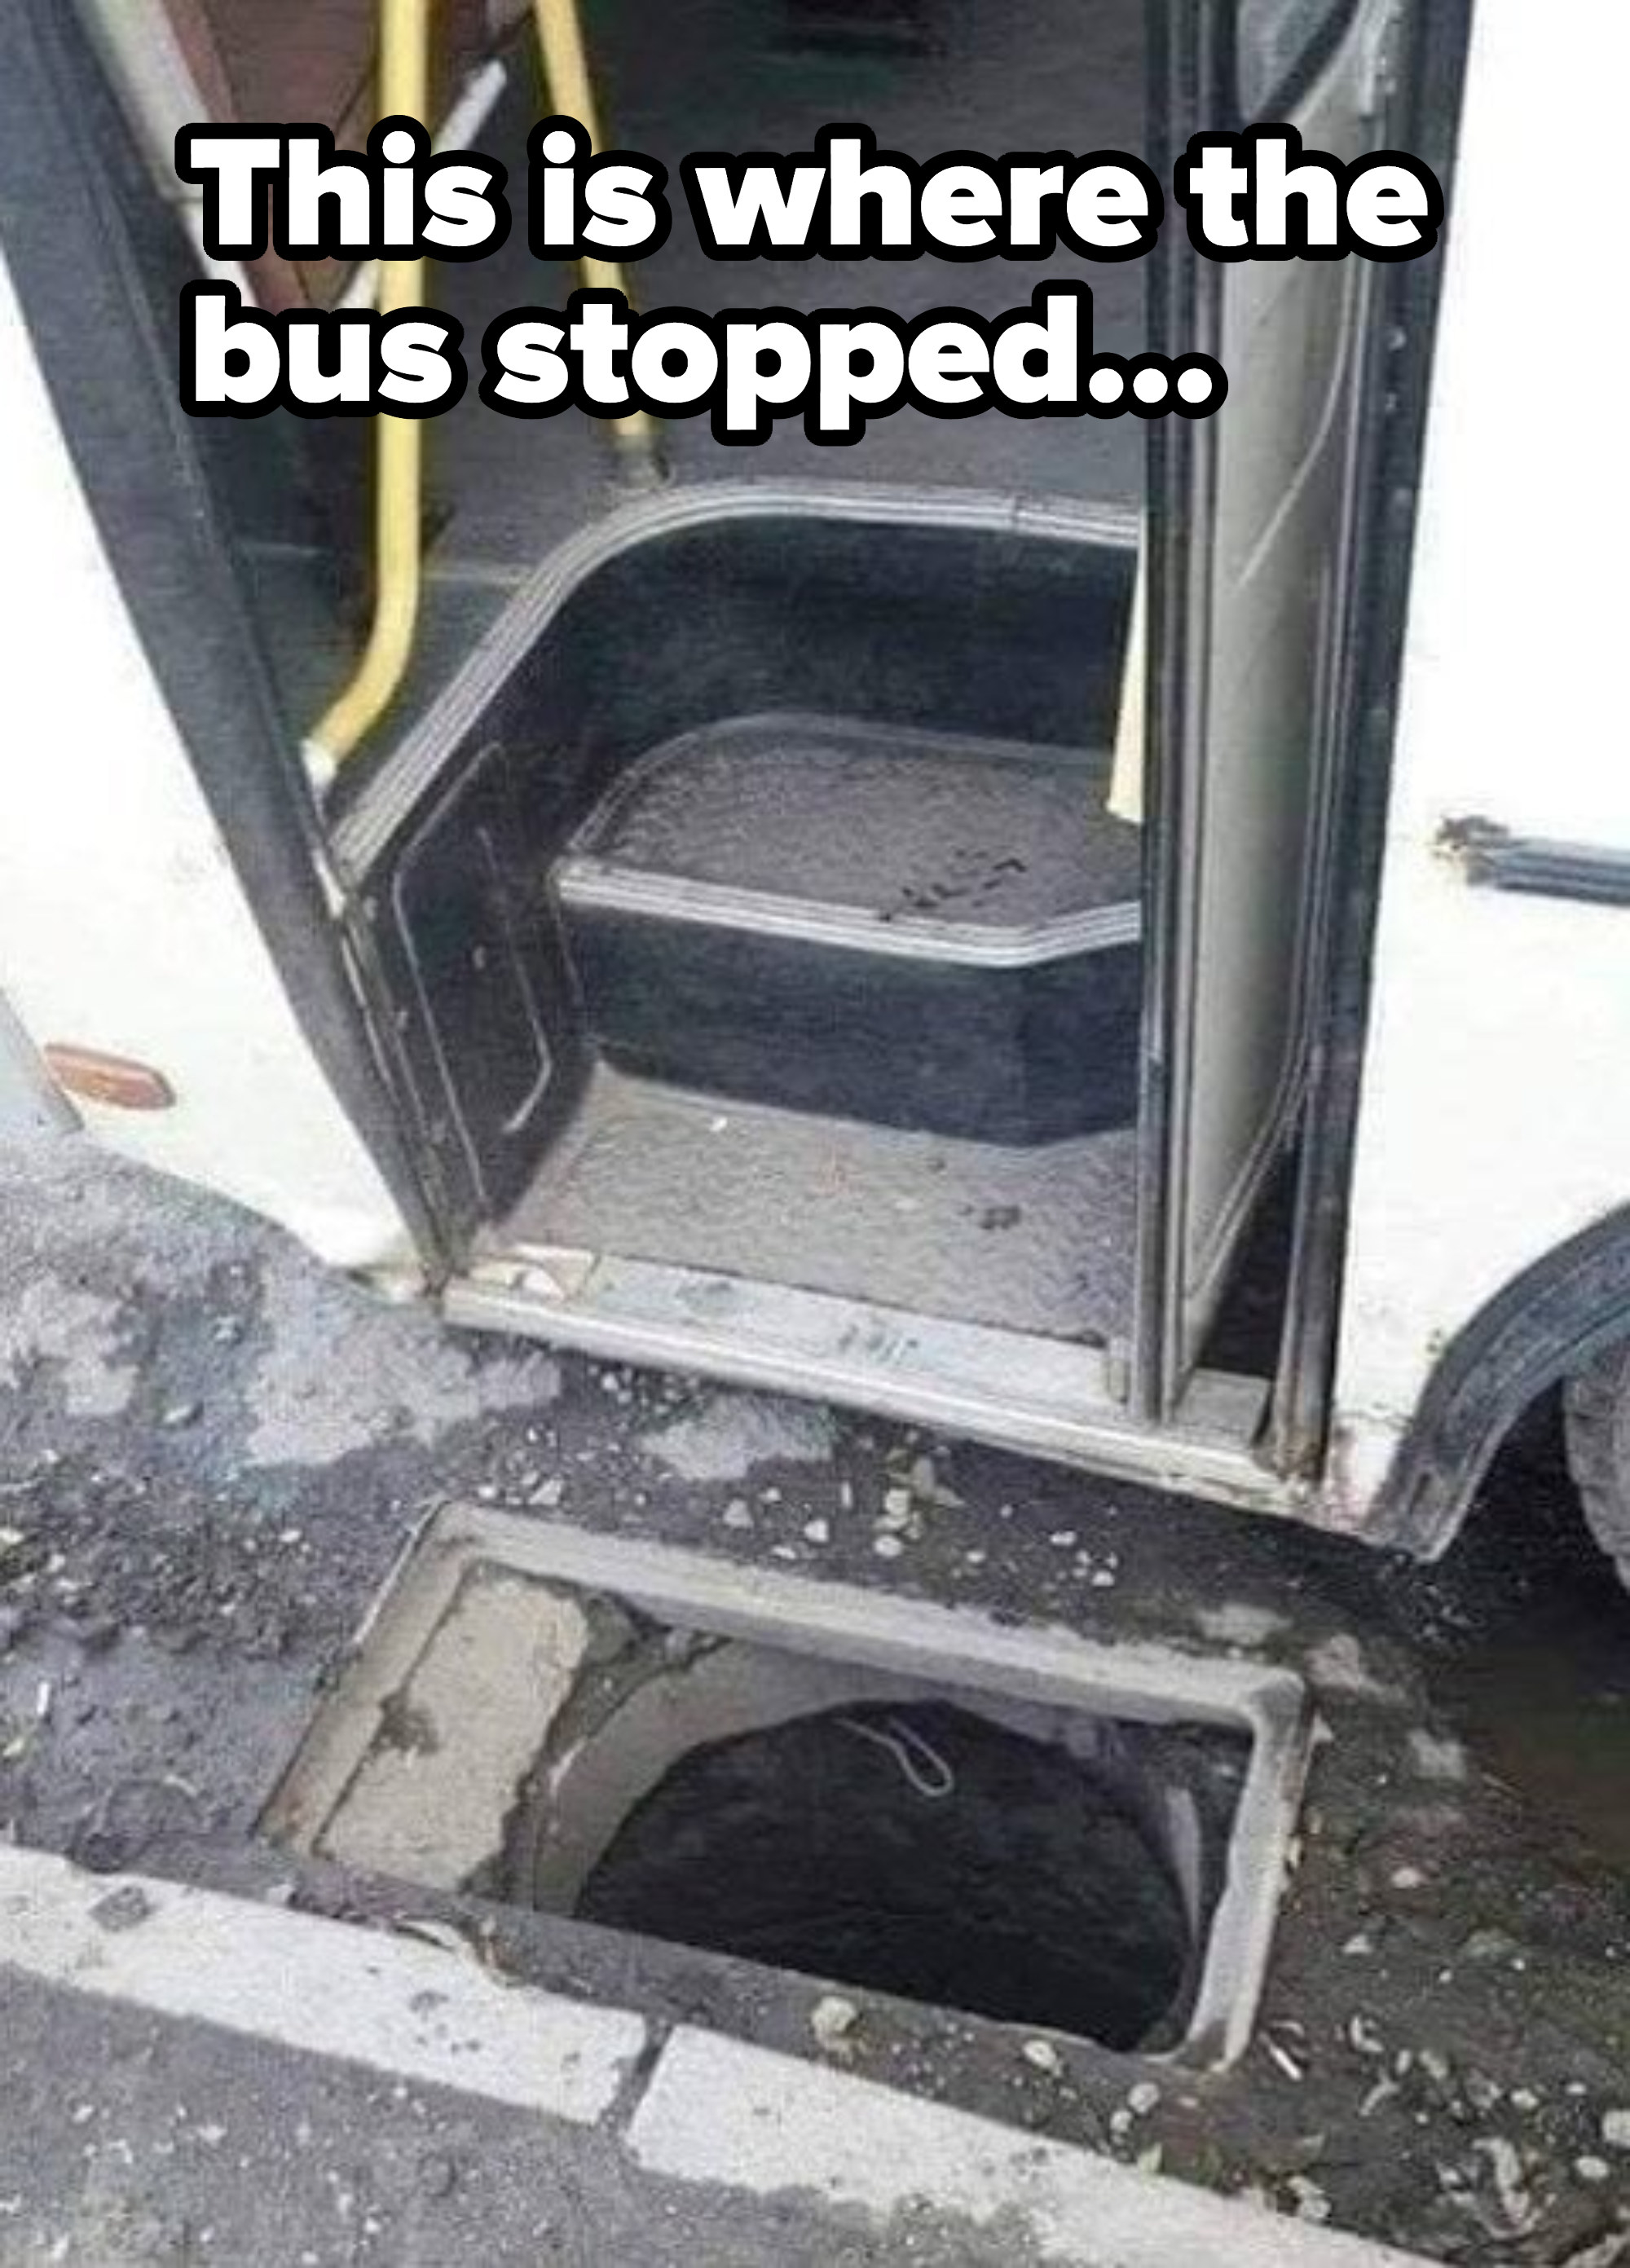 hole next to where the bus stopped